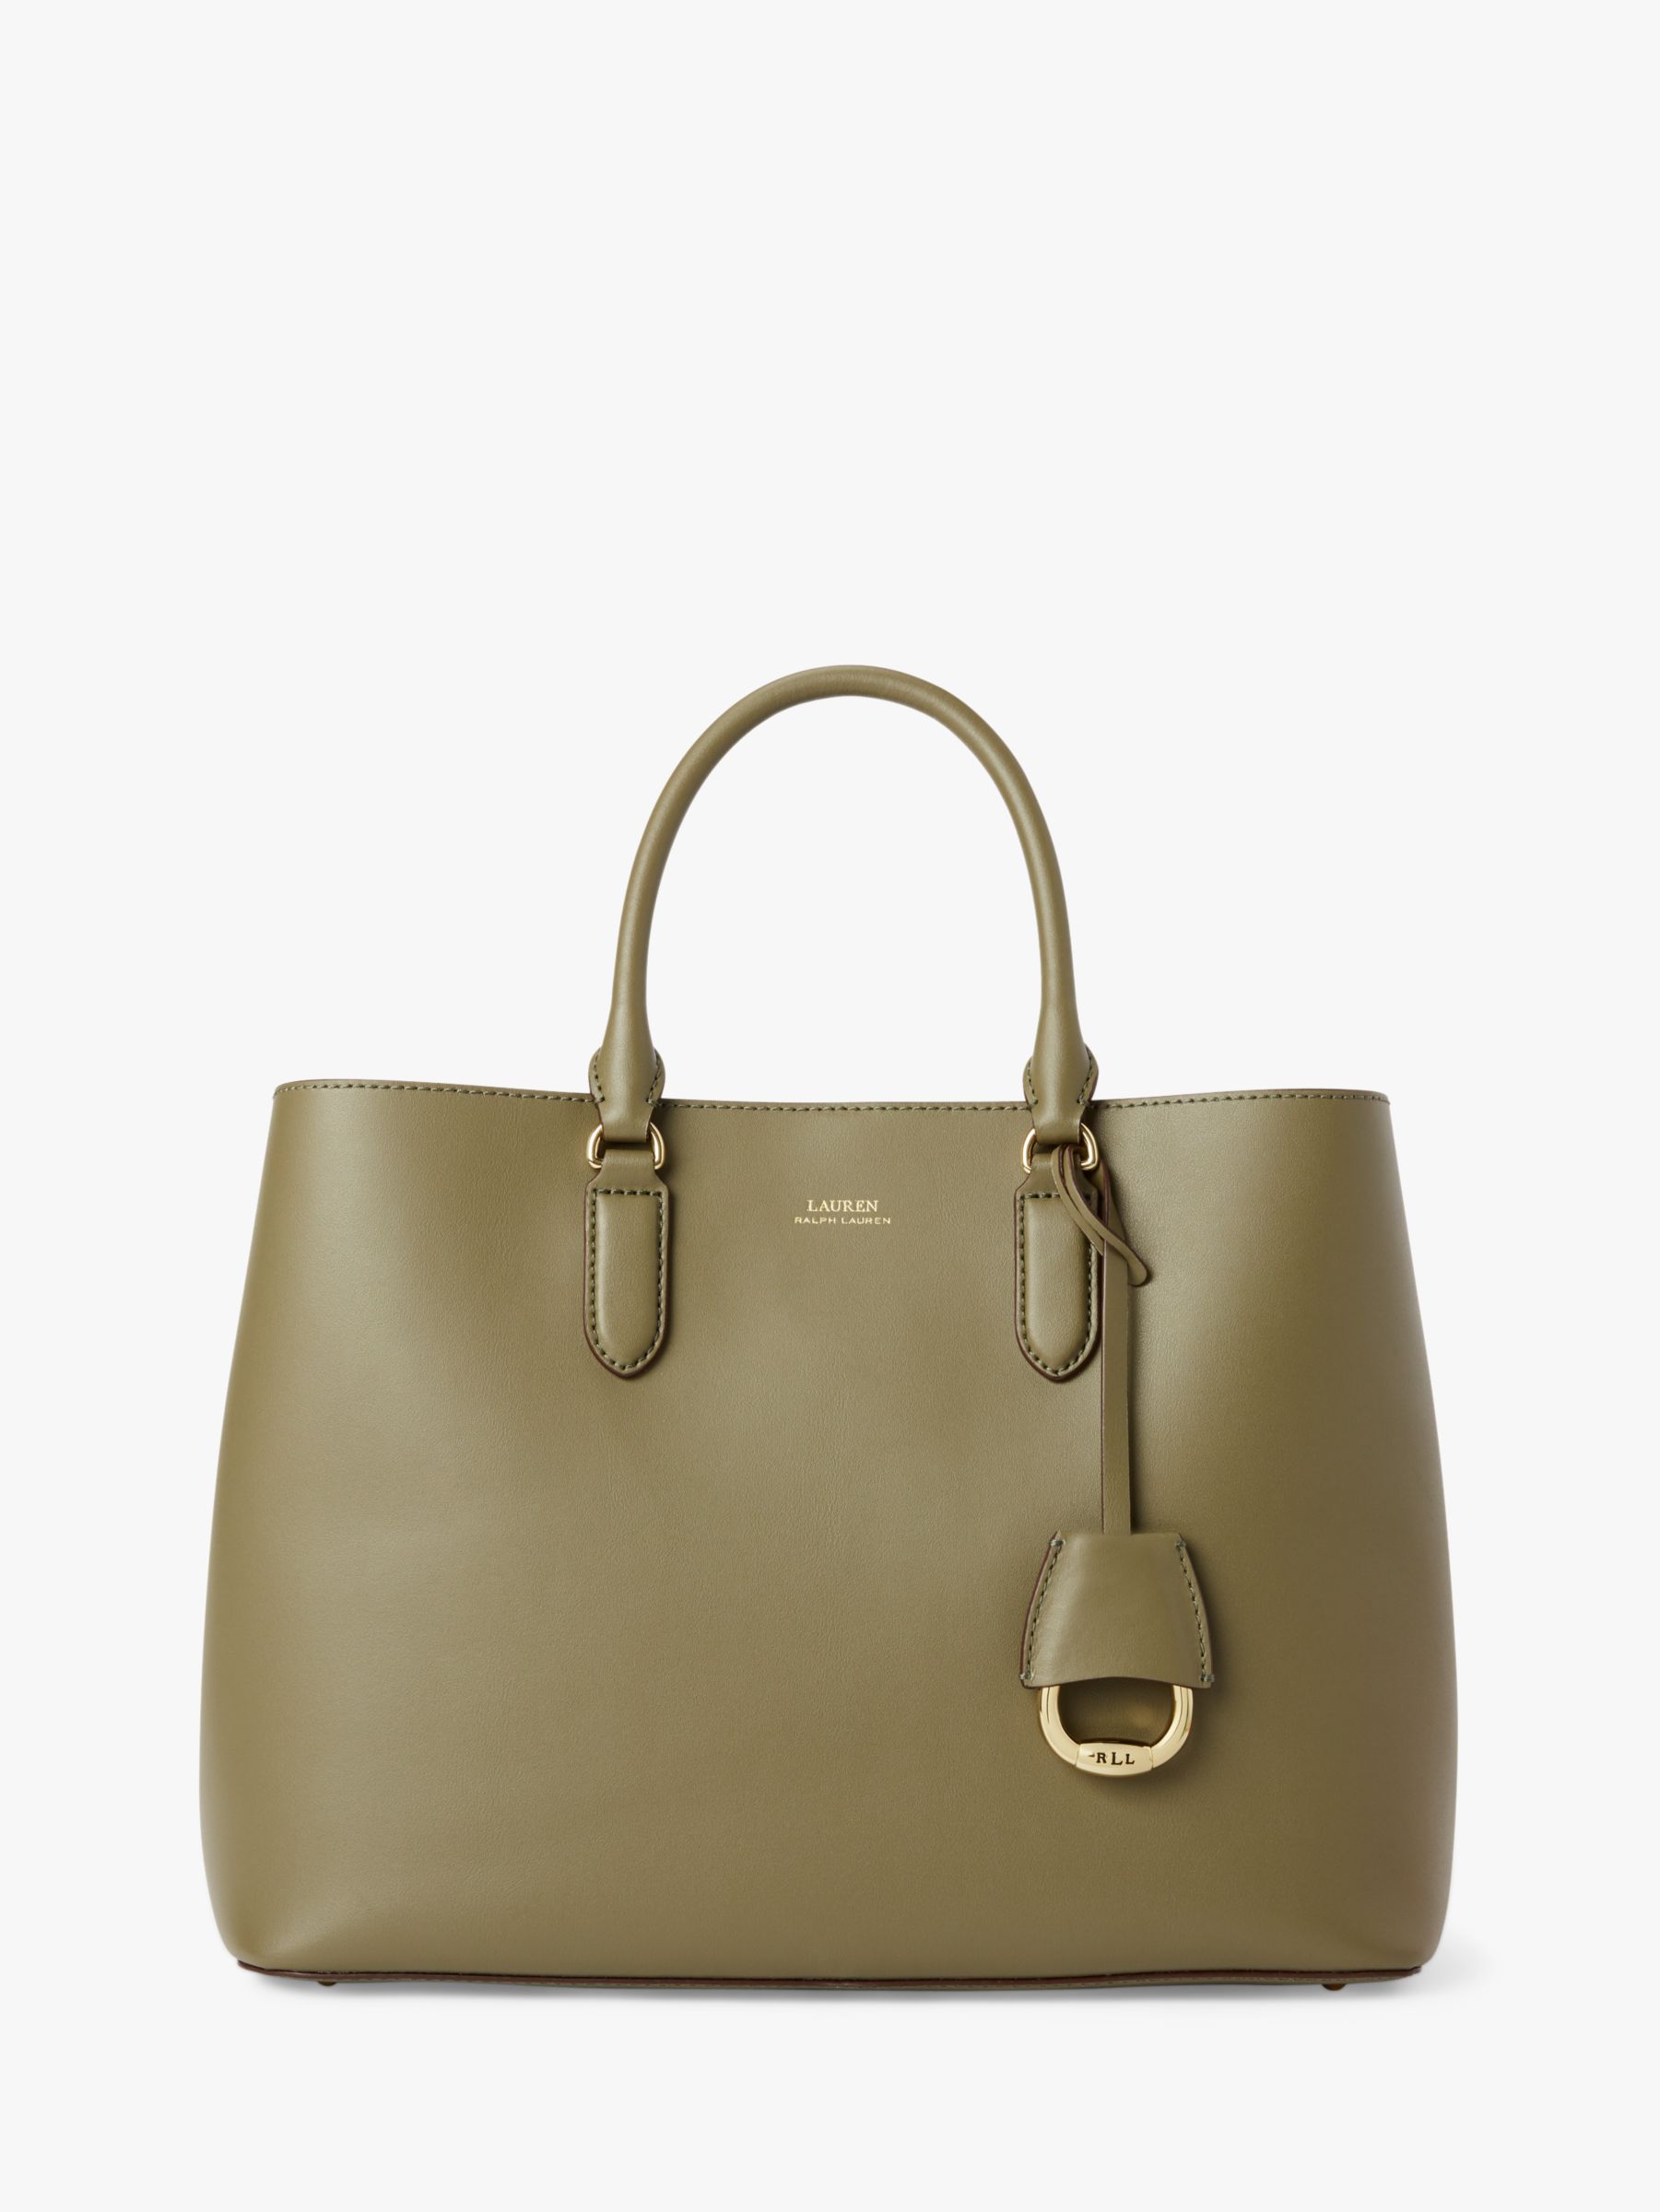 dryden marcy leather satchel